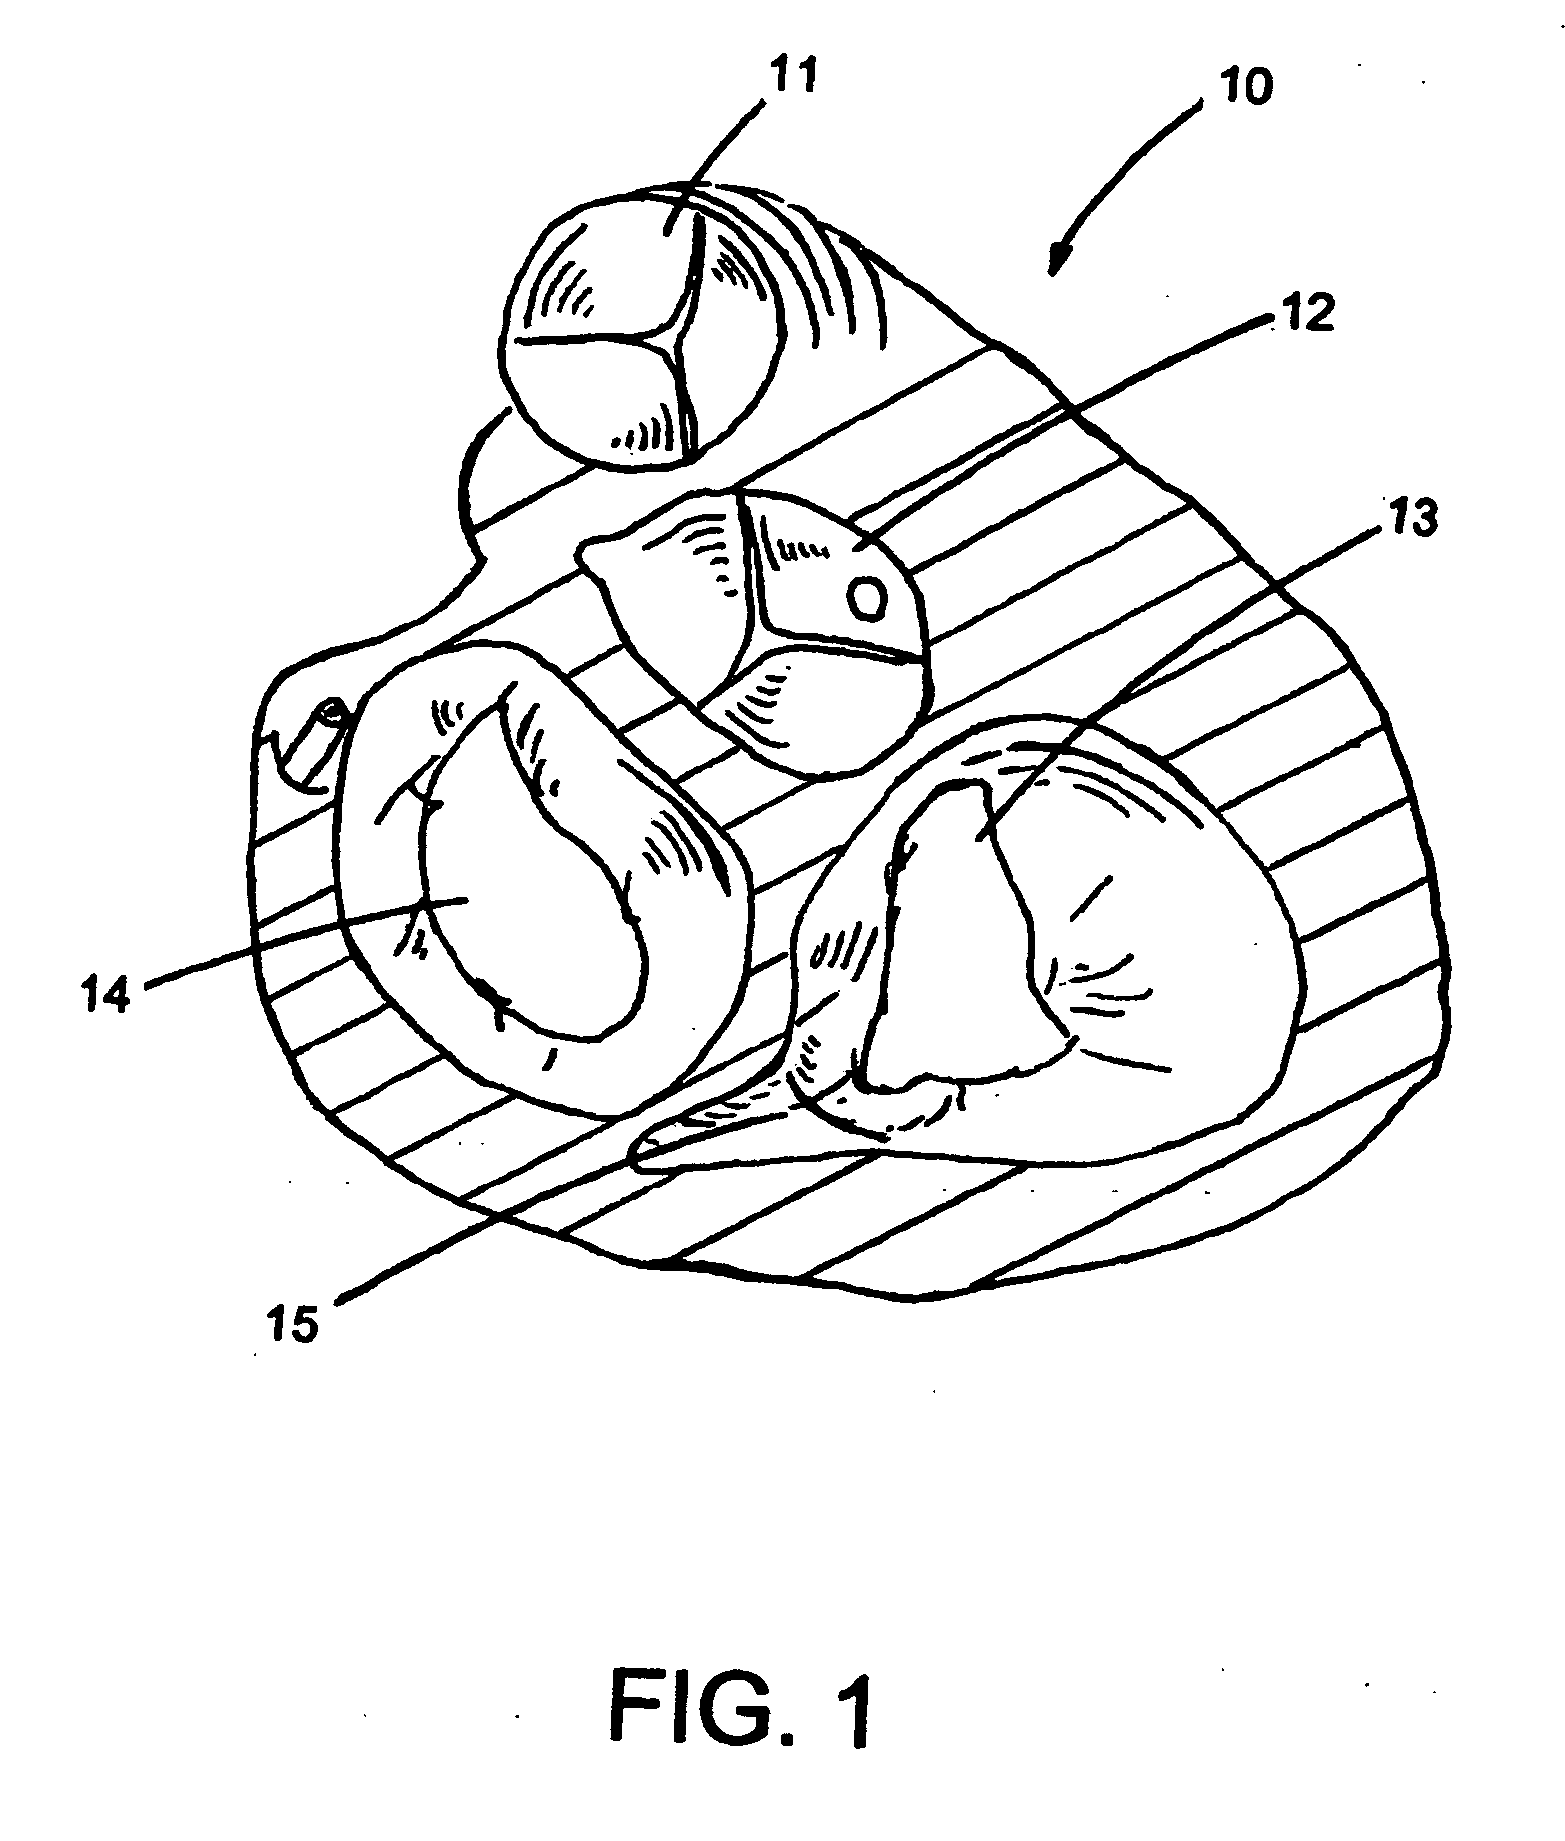 Method and apparatus for percutaneous reduction of anterior-posterior diameter of mitral valve